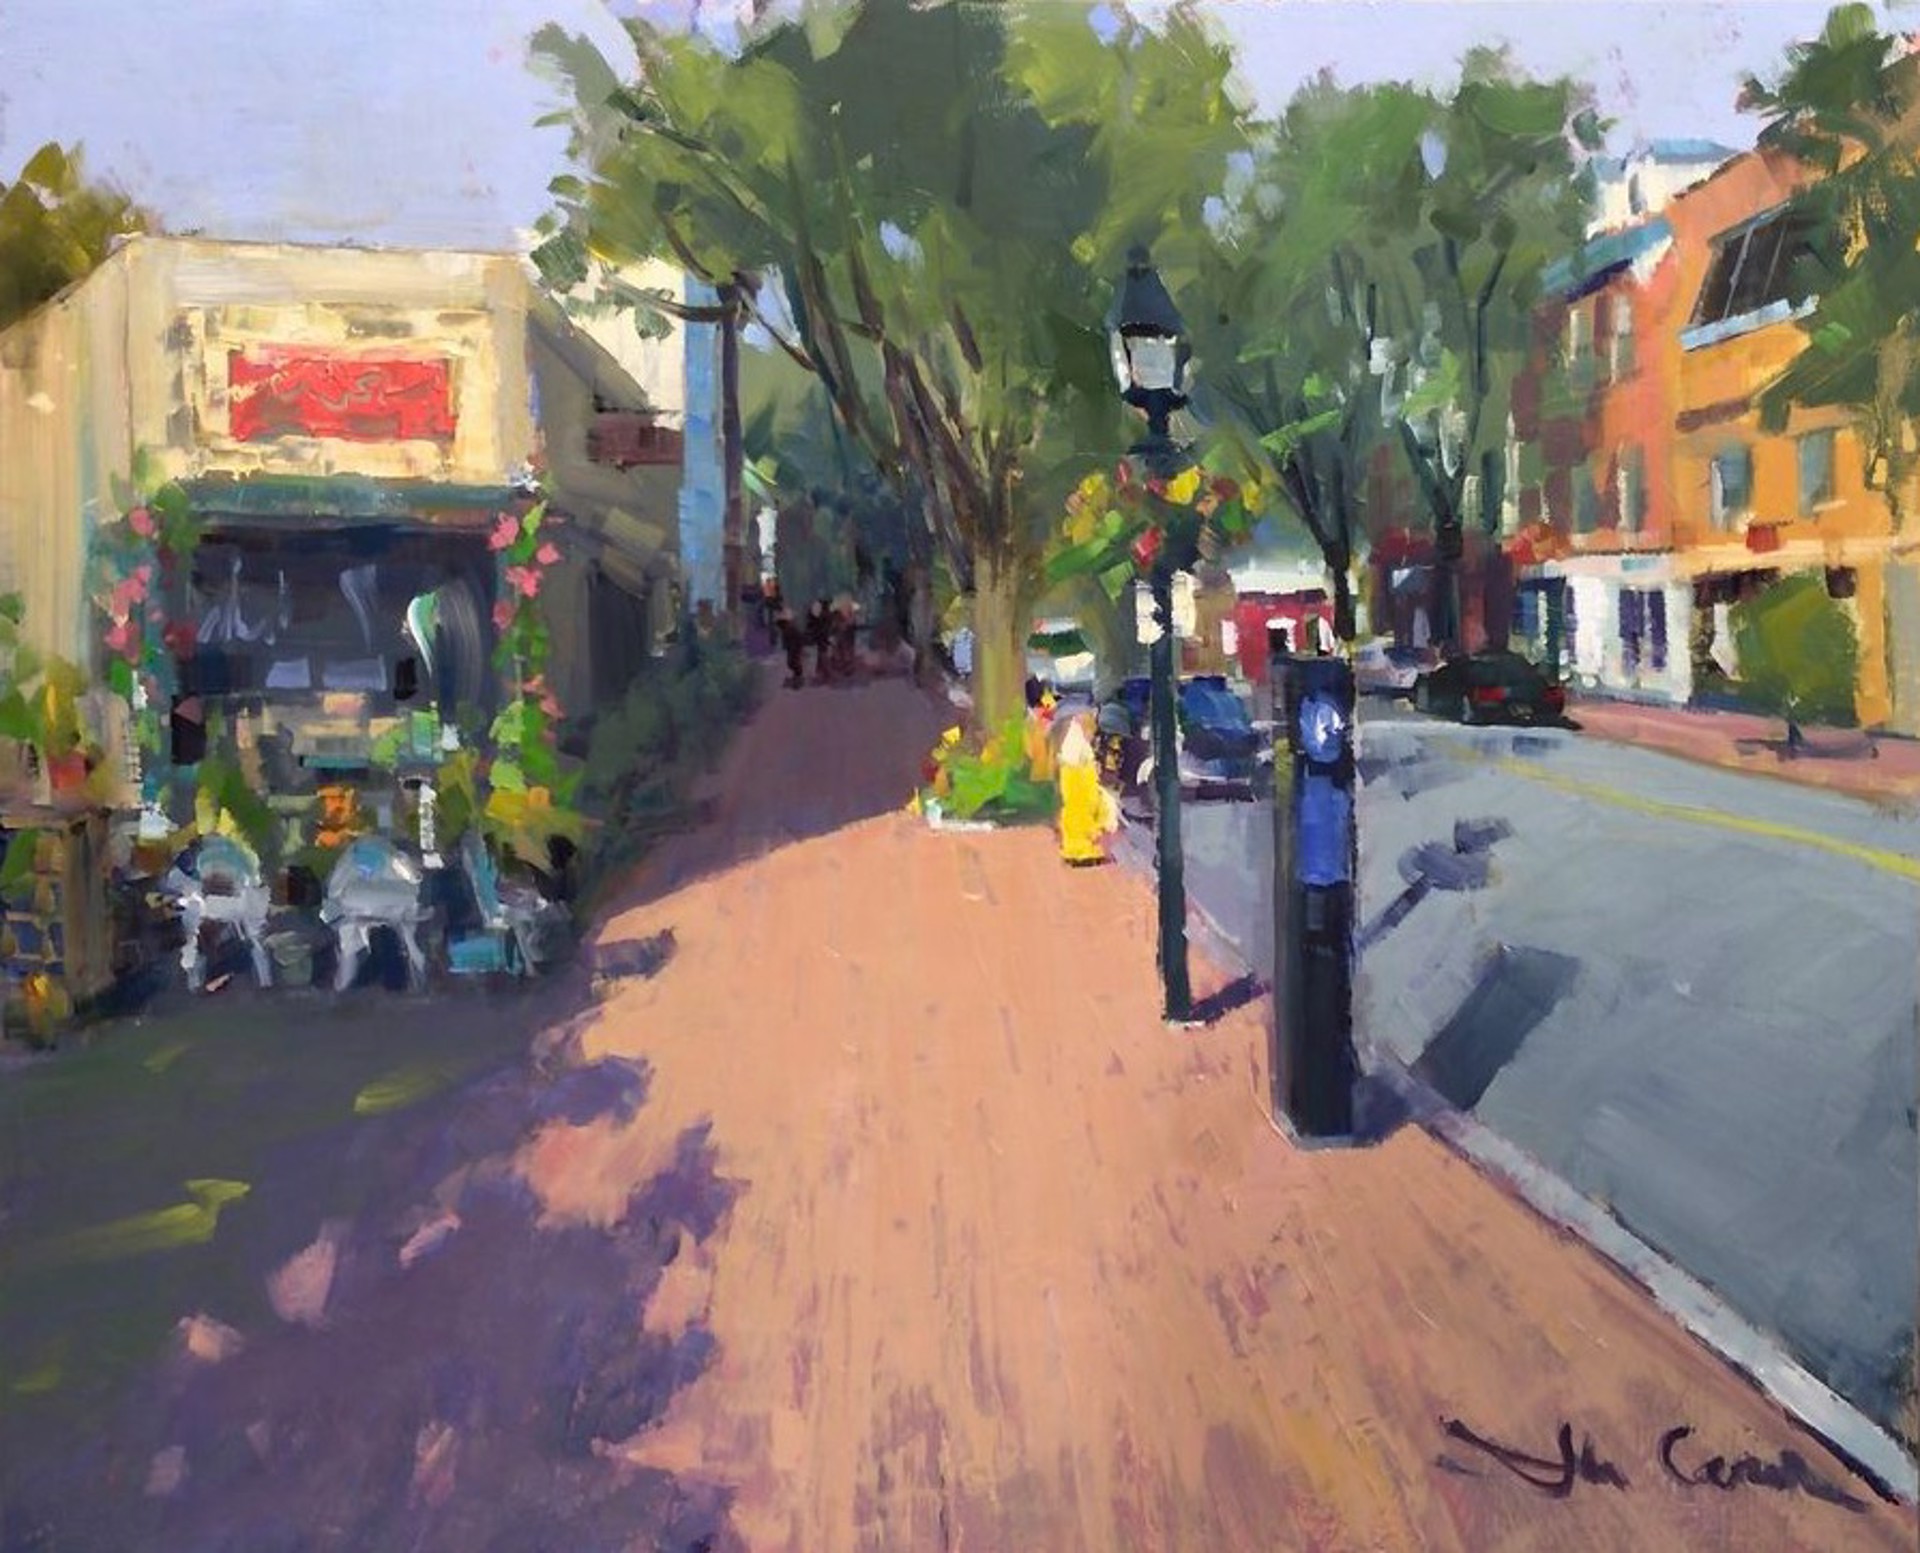 On the Street Where You Live by Jim Carson